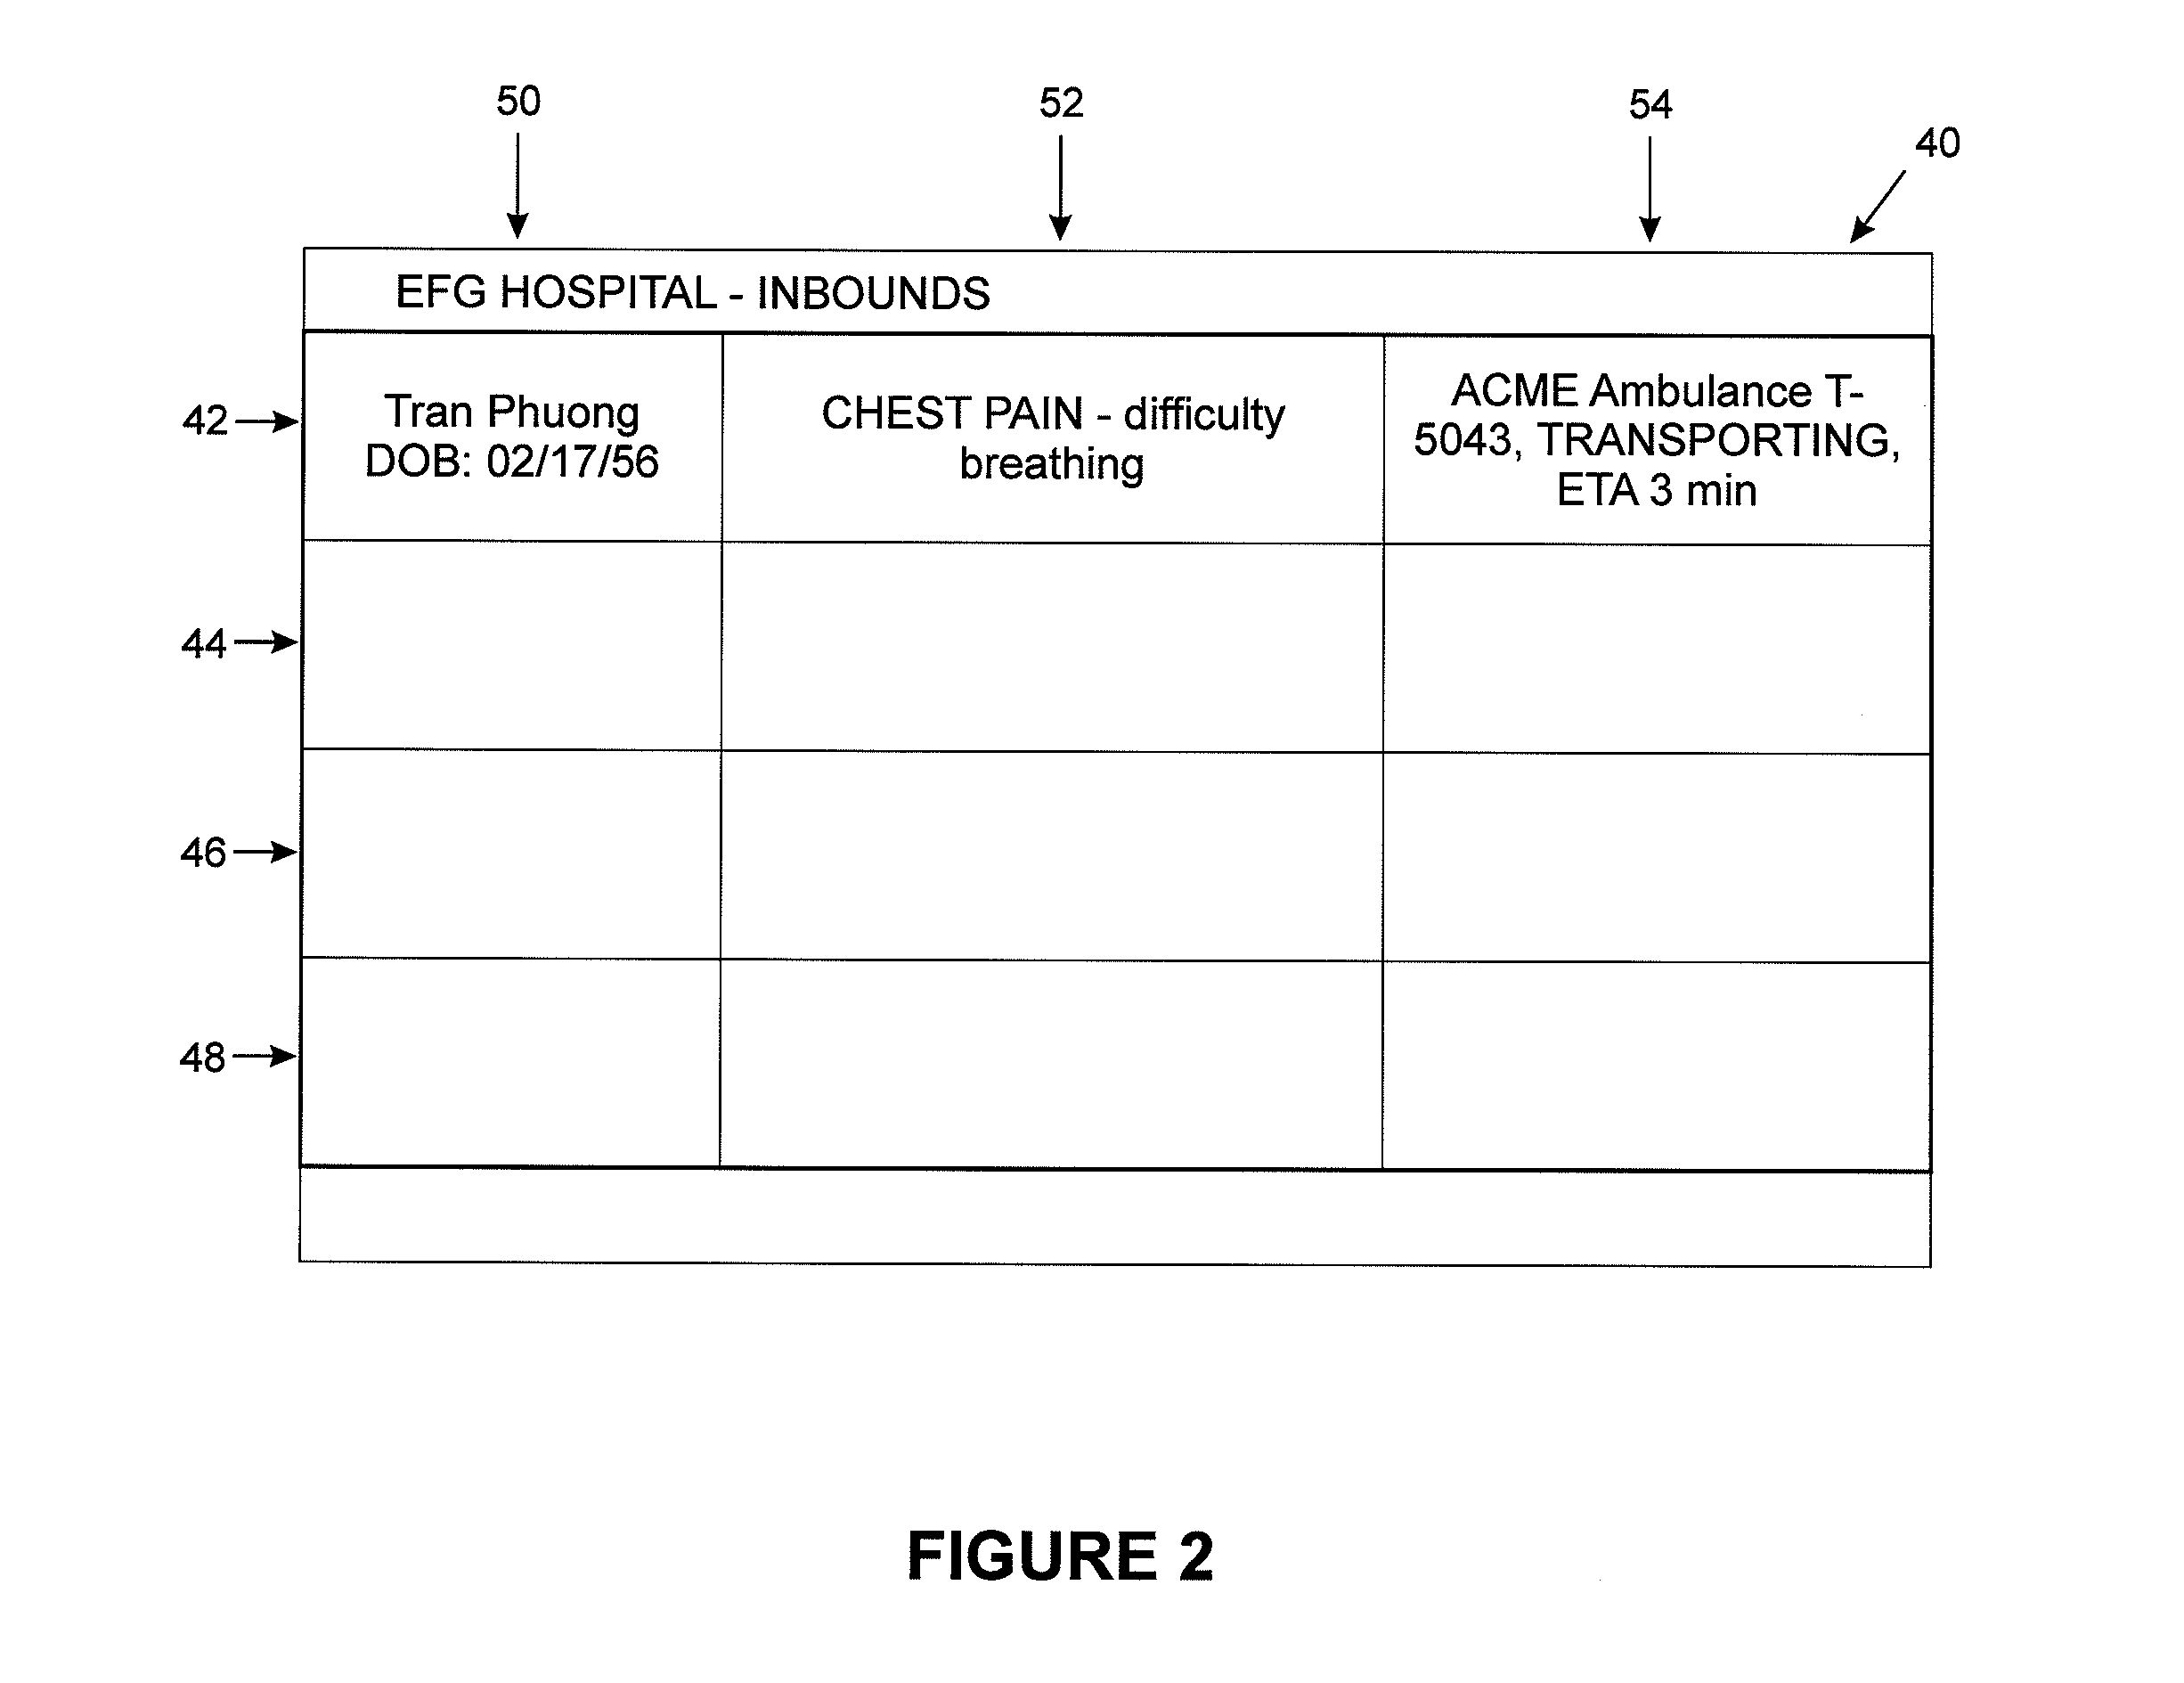 System and method for visual display of bed status by integration of location information from ambulance transports